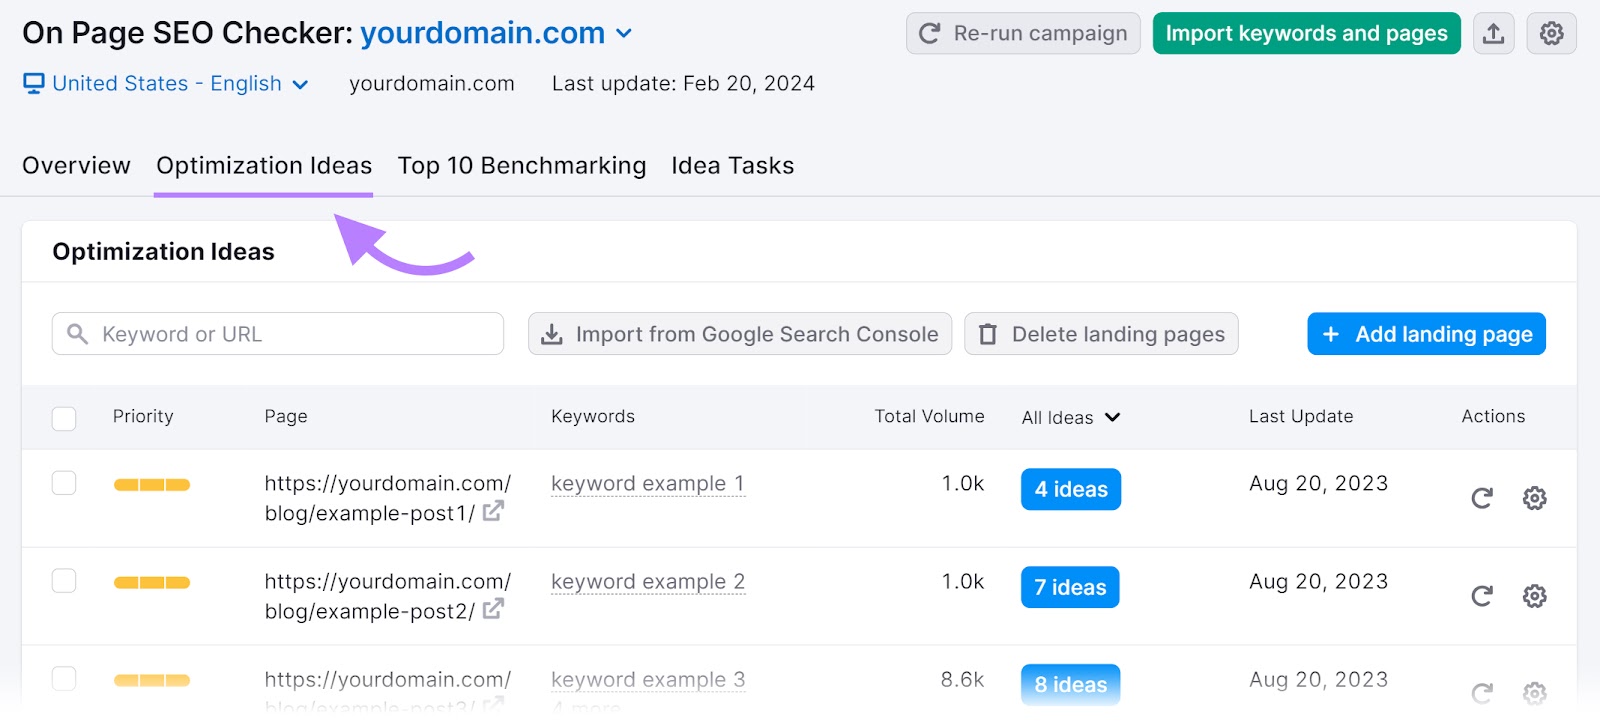 On Page SEO Checker showing the “Optimization Ideas” tab.